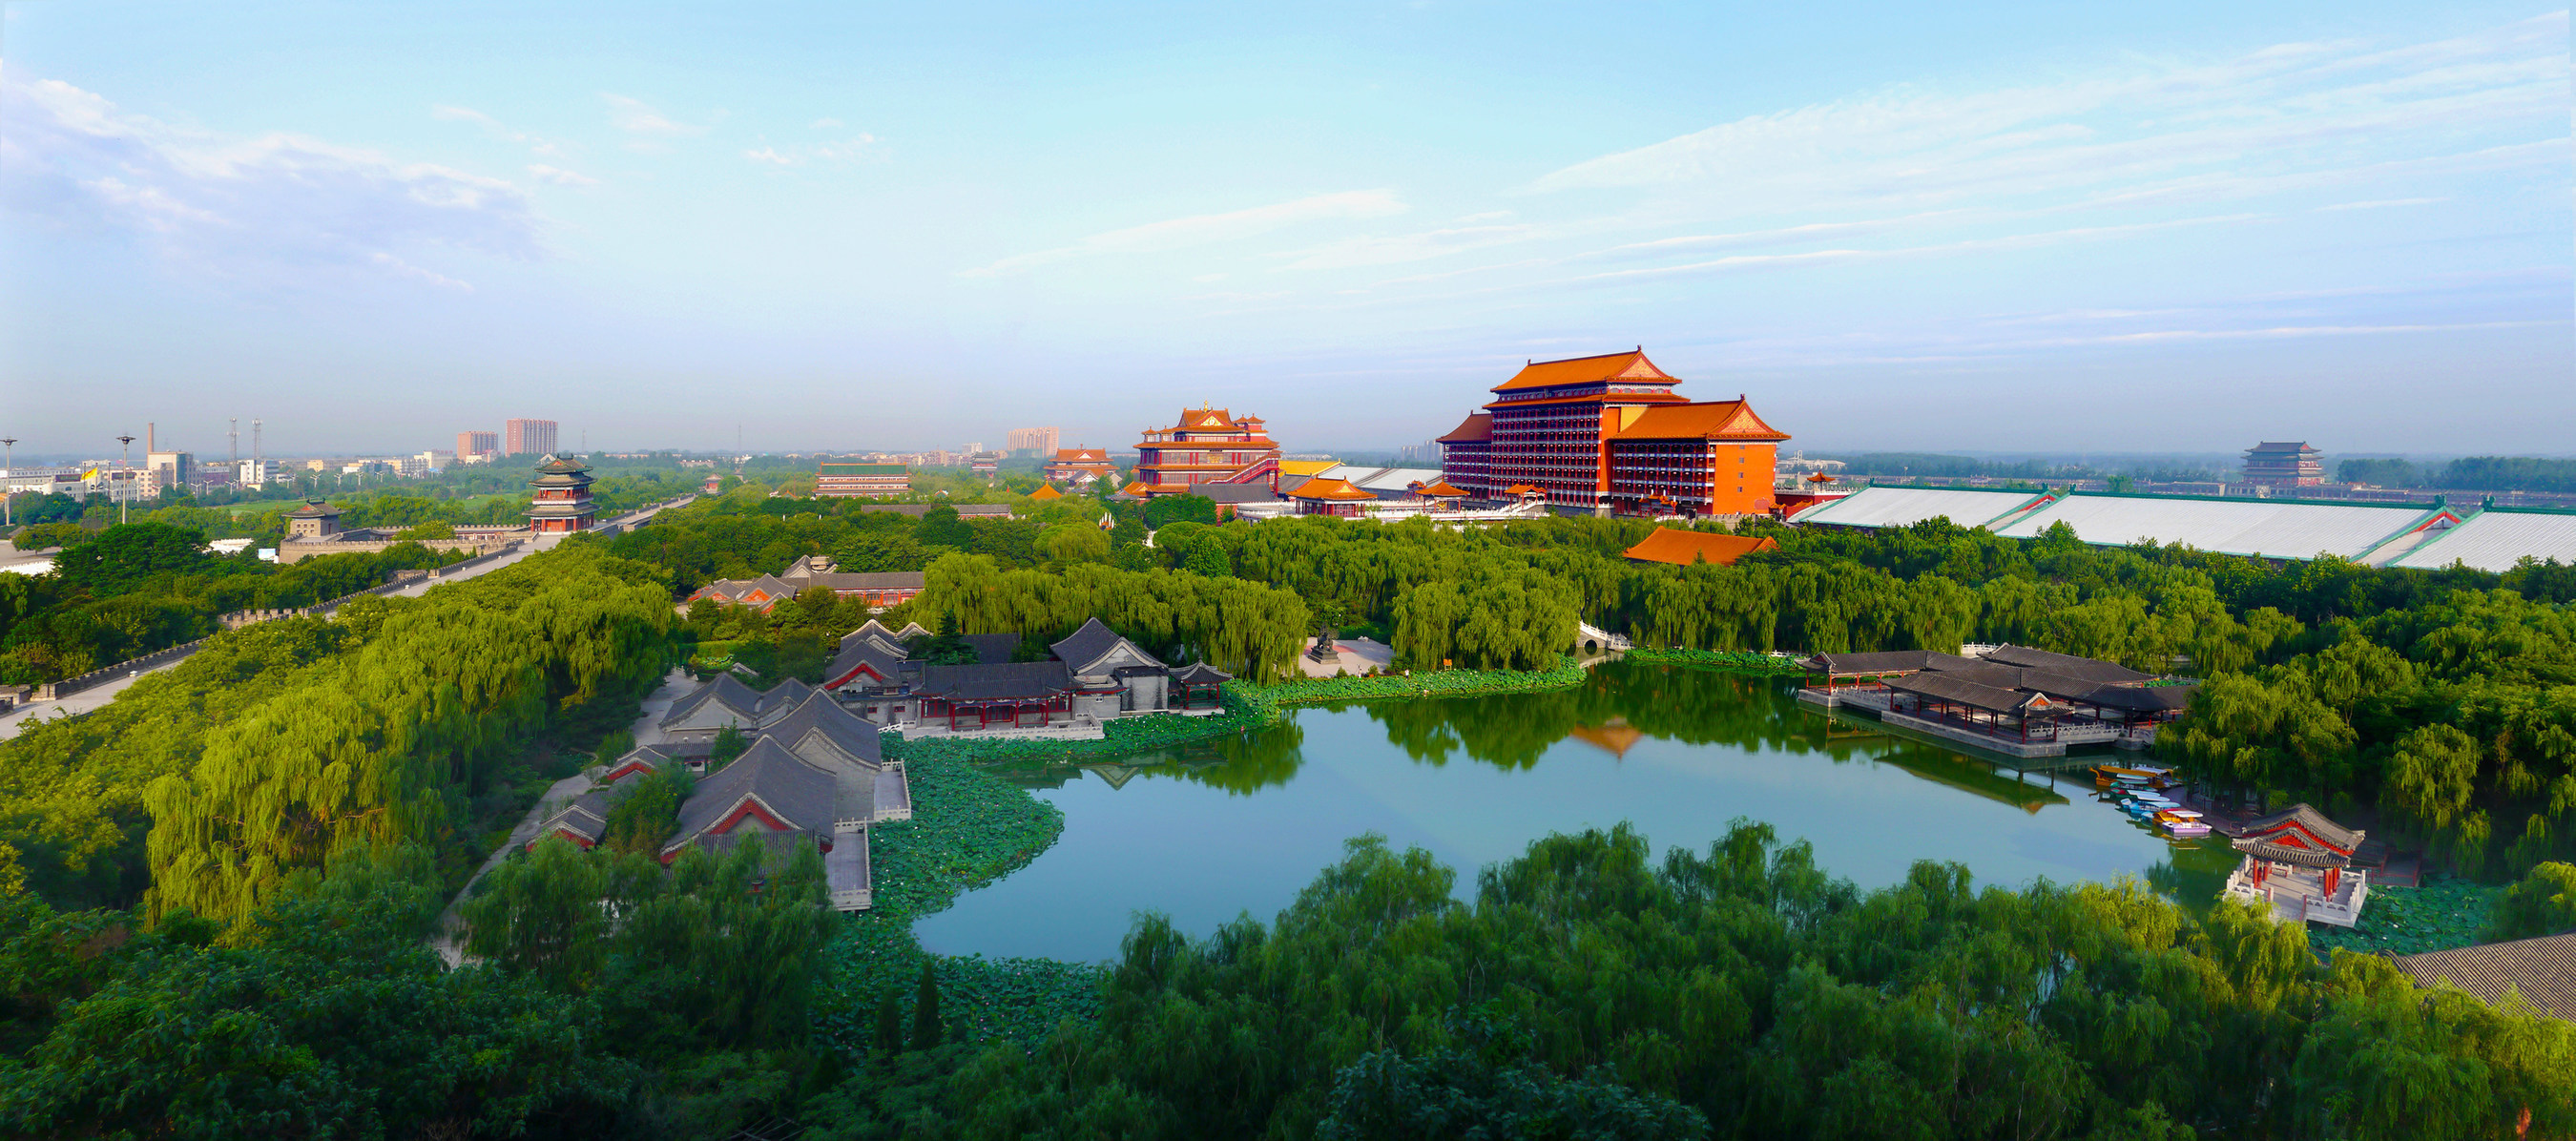 The 2016 China-US Motion Picture Summit will take place in Grand Epoch City, China.